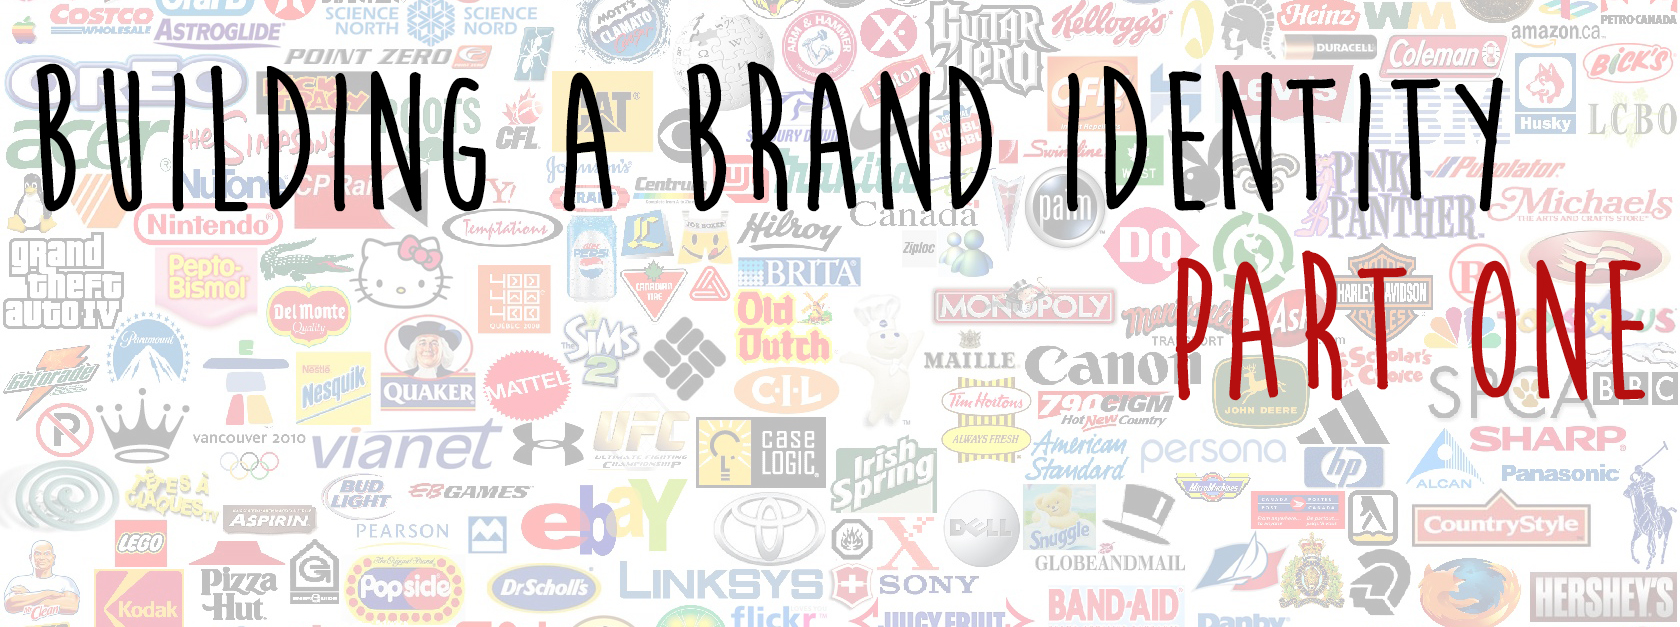 Building a Brand Identity: Part 1